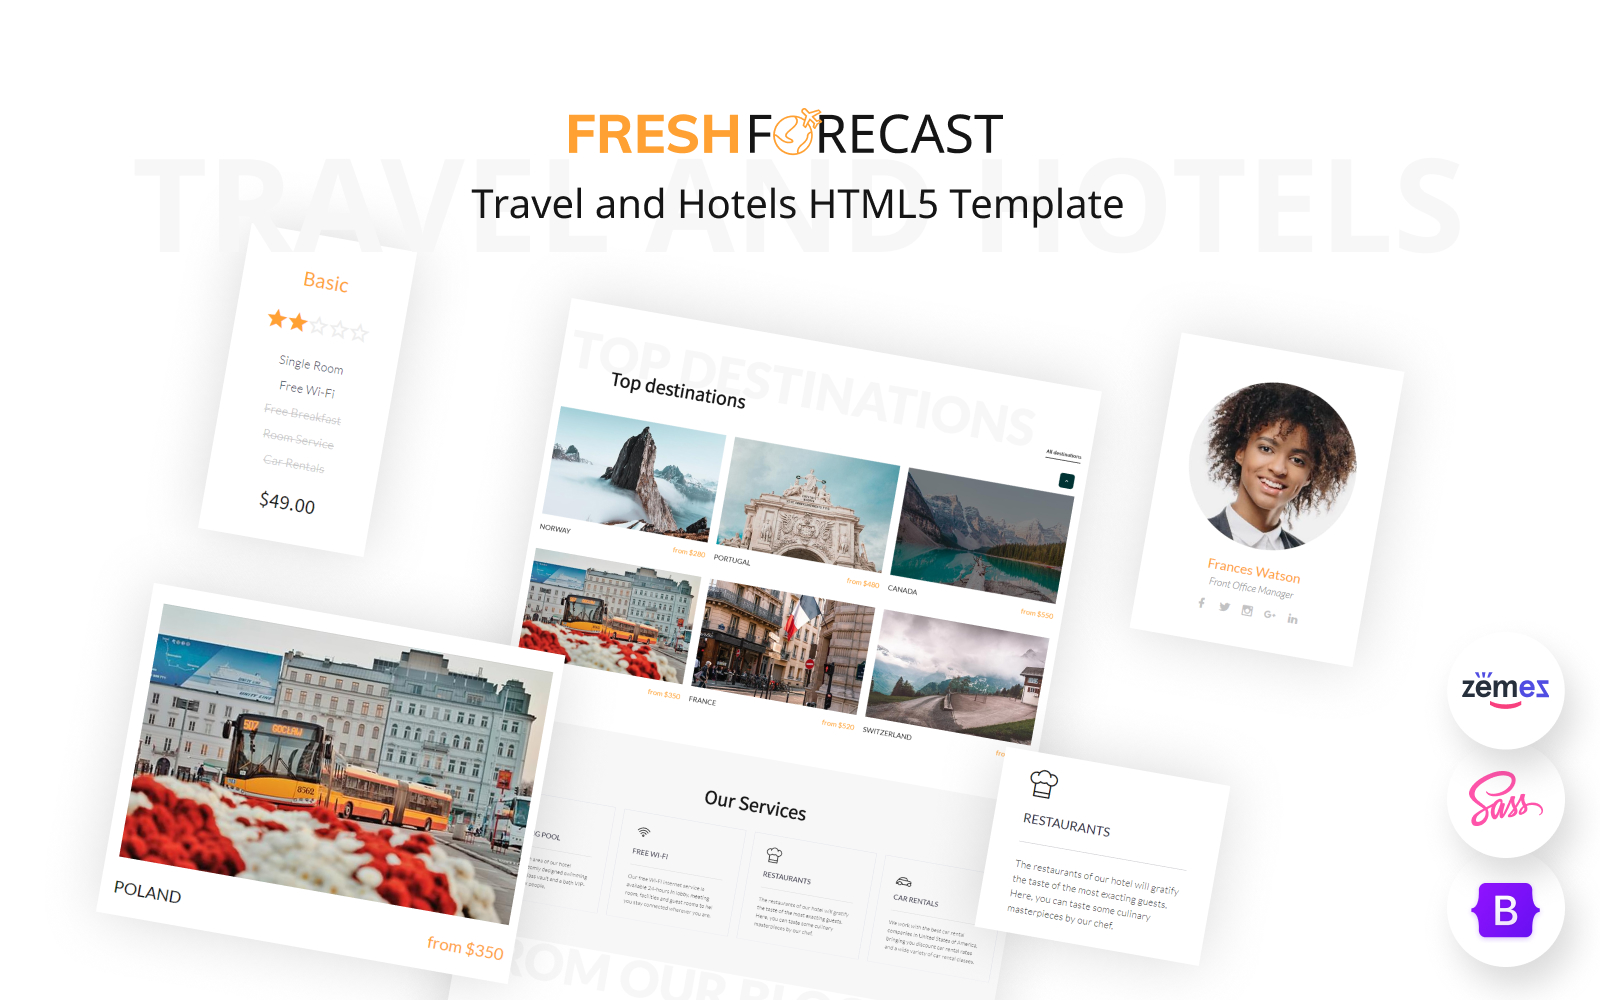 Fresh Forecast - Travel and Hotels HTML5 Template